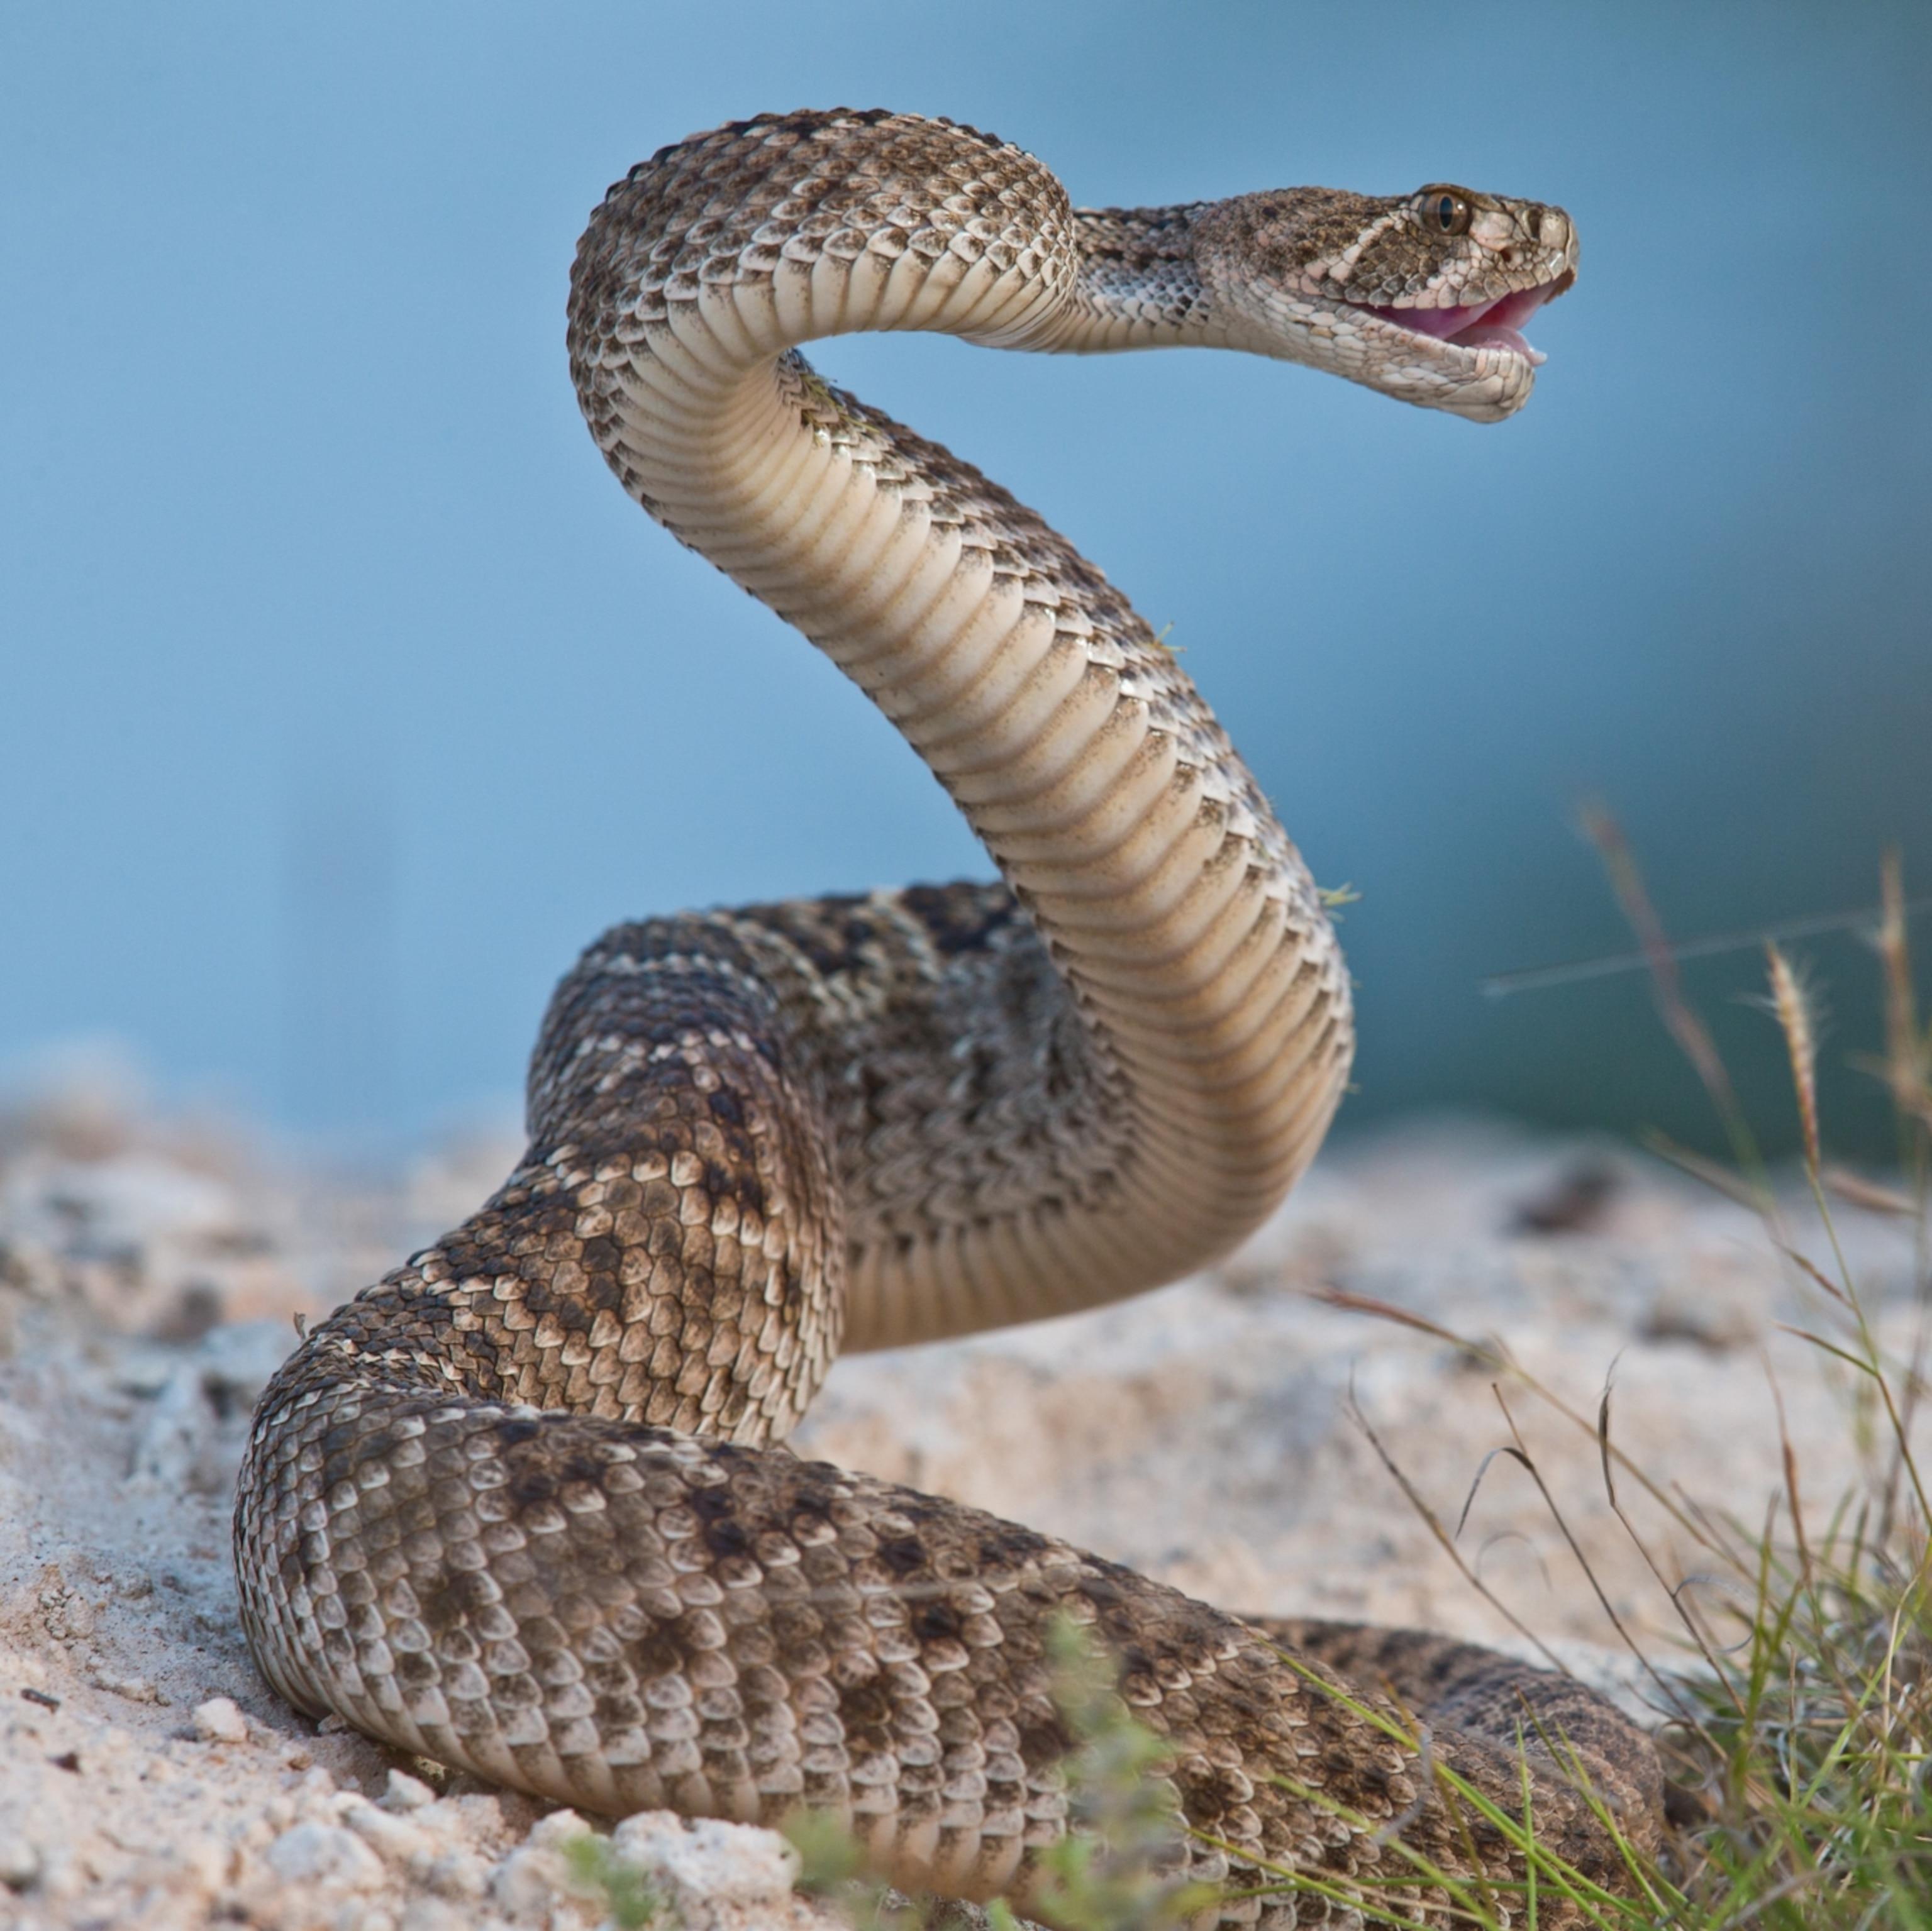 Rattlesnakes trick humans into thinking theyre closer than they are